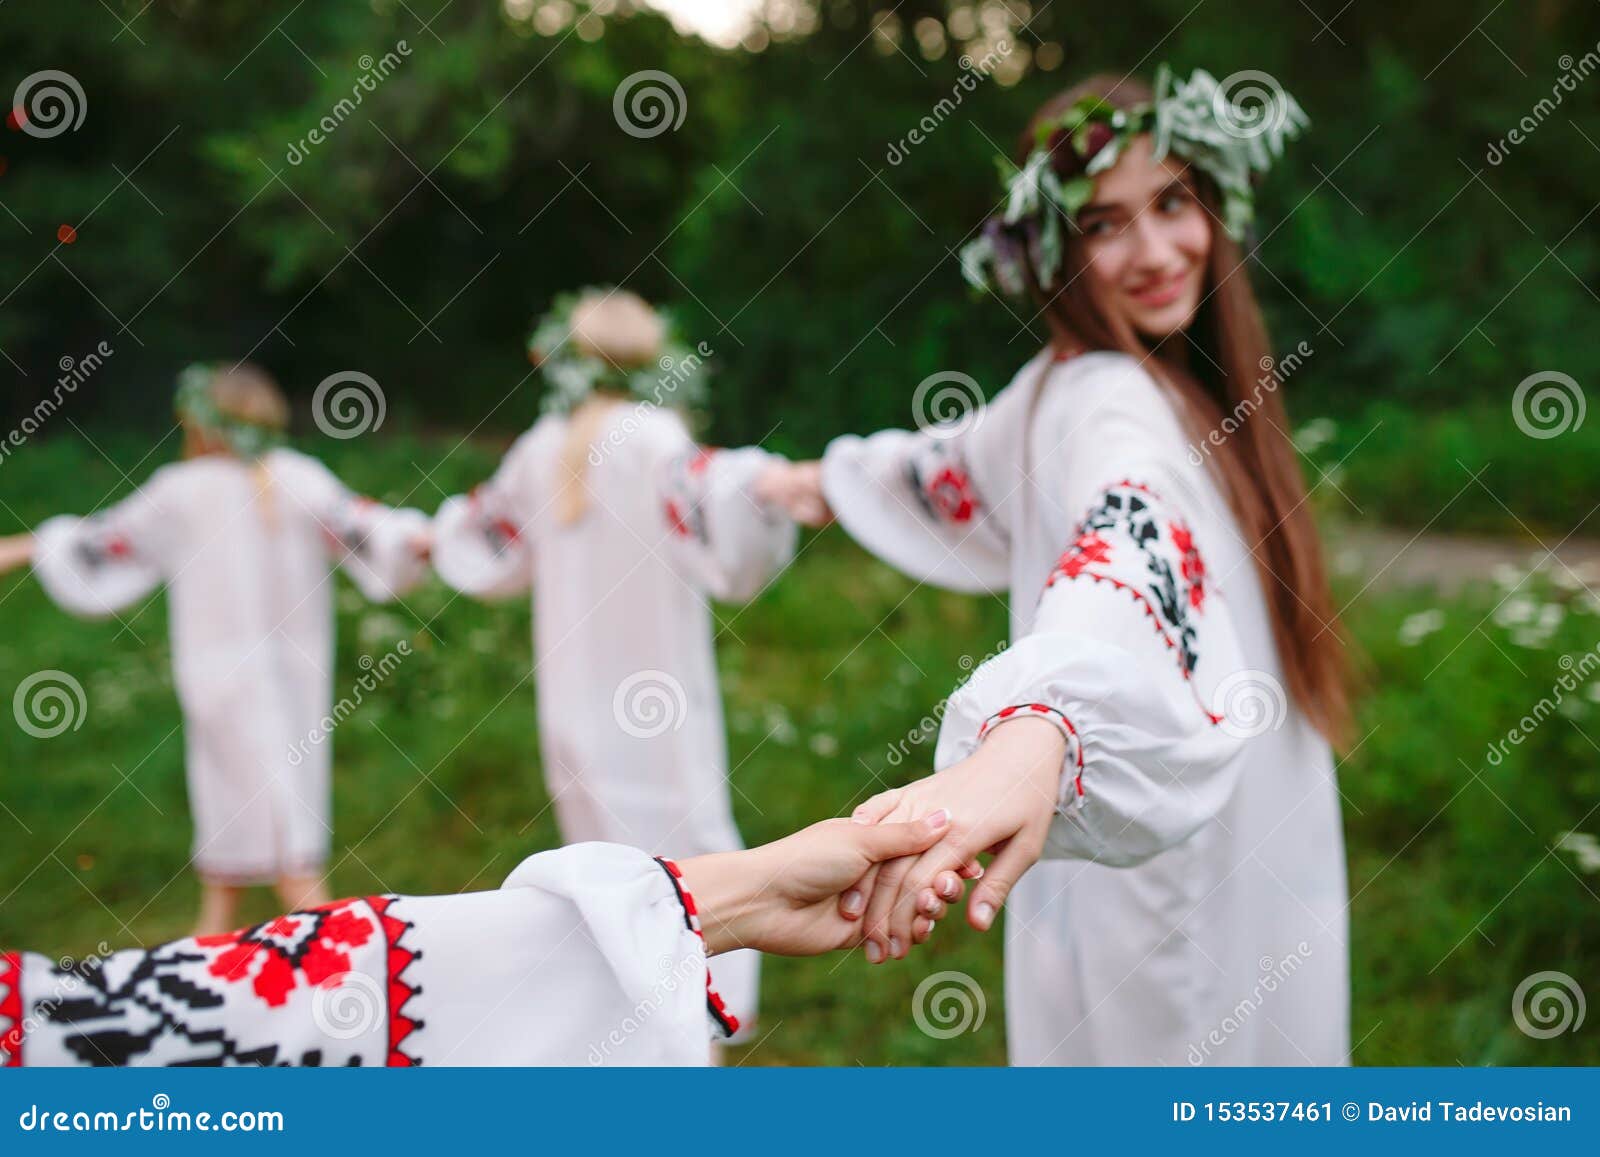 https://thumbs.dreamstime.com/z/midsummer-young-people-slavic-clothes-revolve-around-fire-midsummer-midsummer-young-people-slavic-clothes-revolve-153537461.jpg